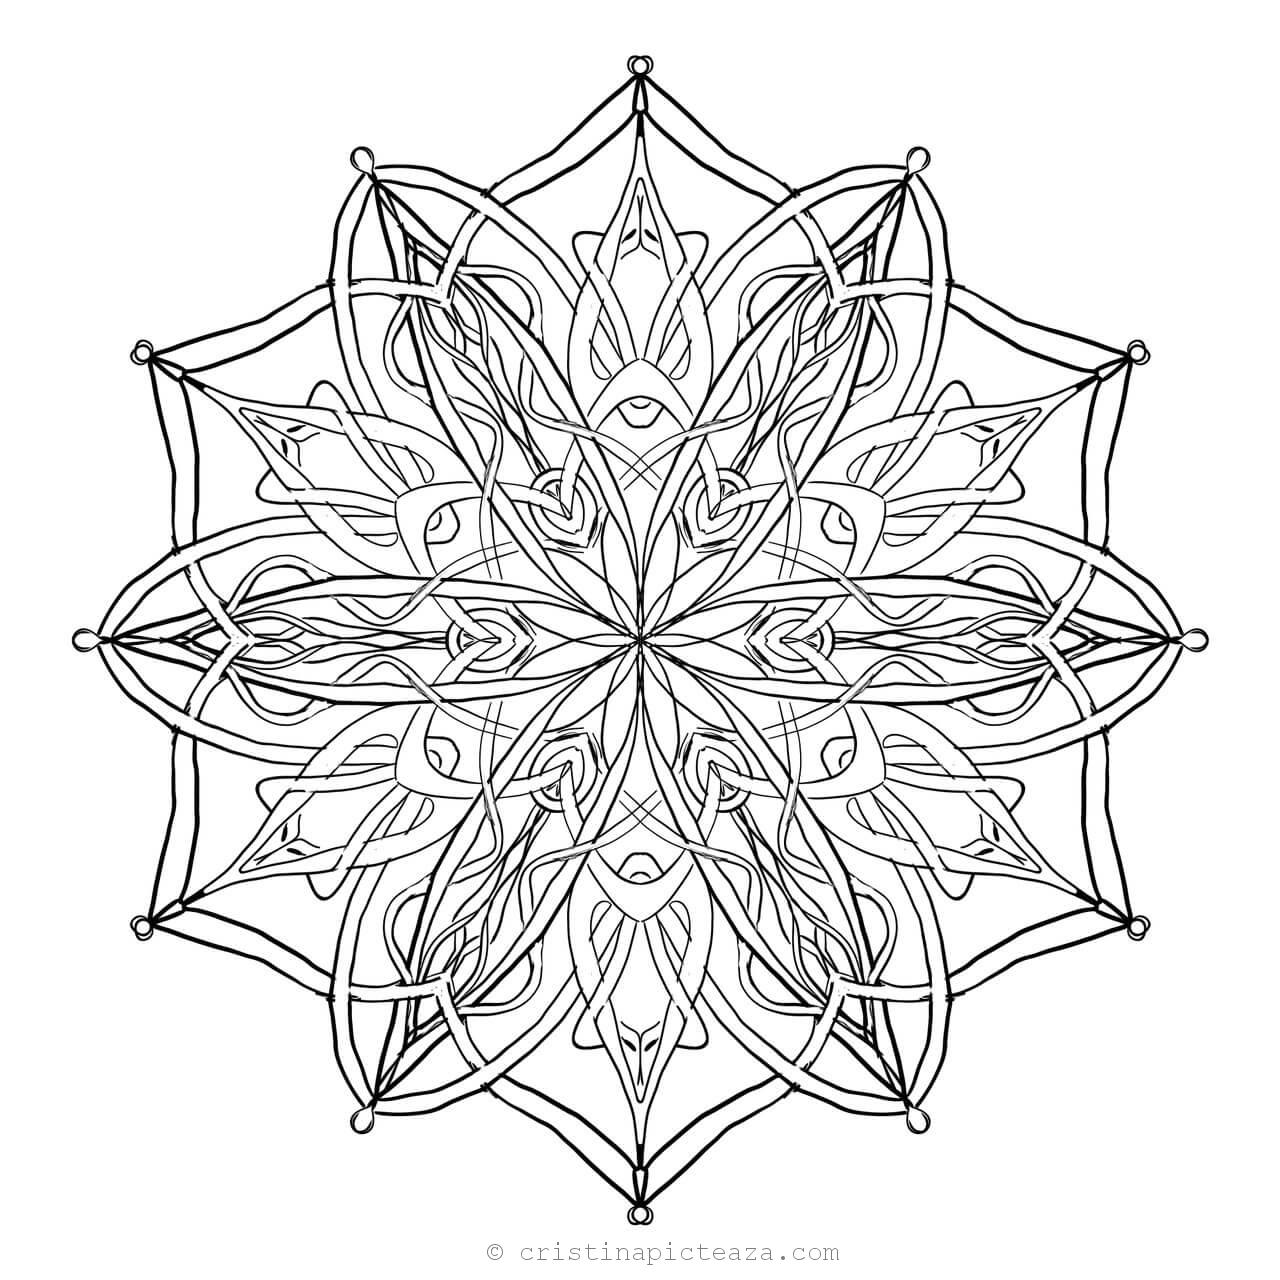 Mandala For Adults Coloring Sheets And Pages For Free